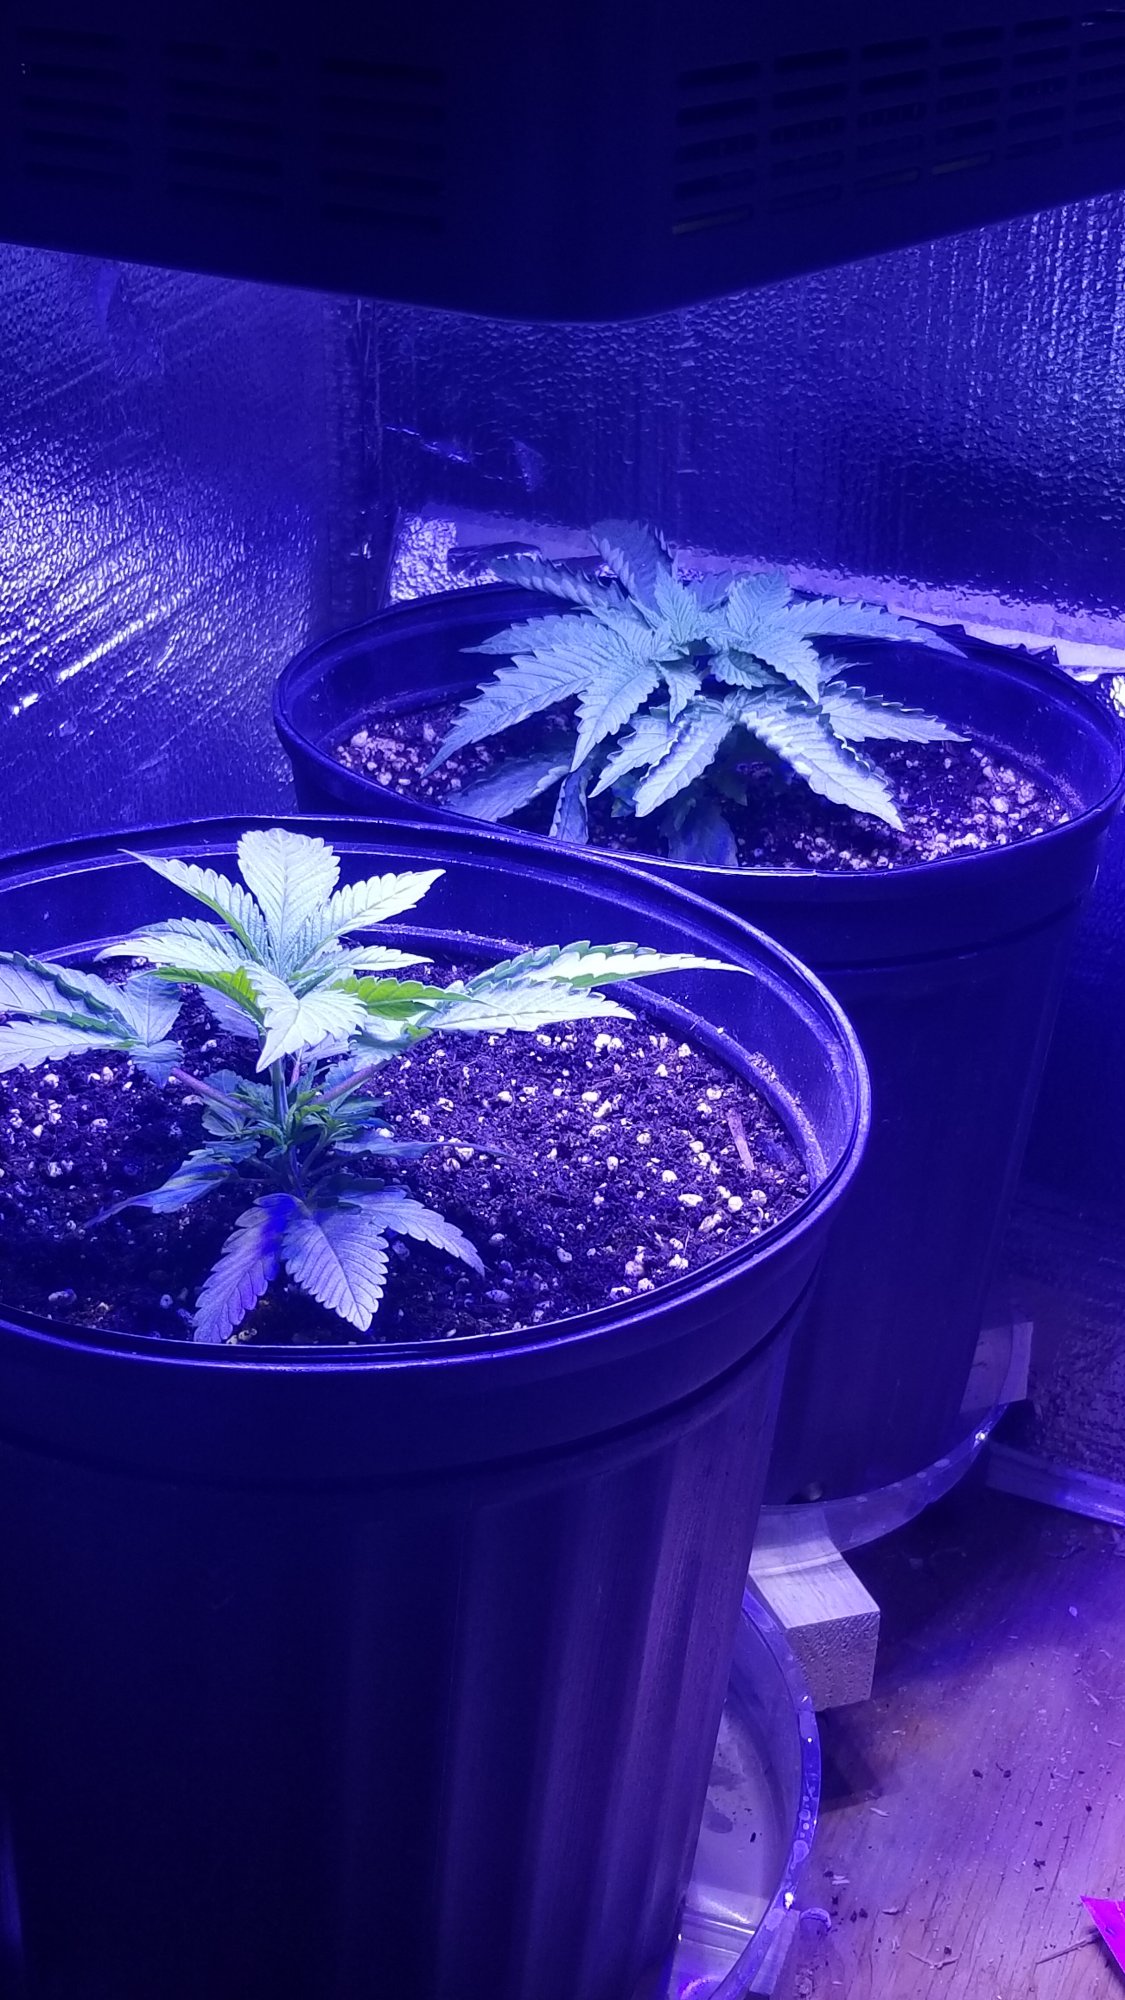 My first grow failure and my second grow success learning from my mistakes